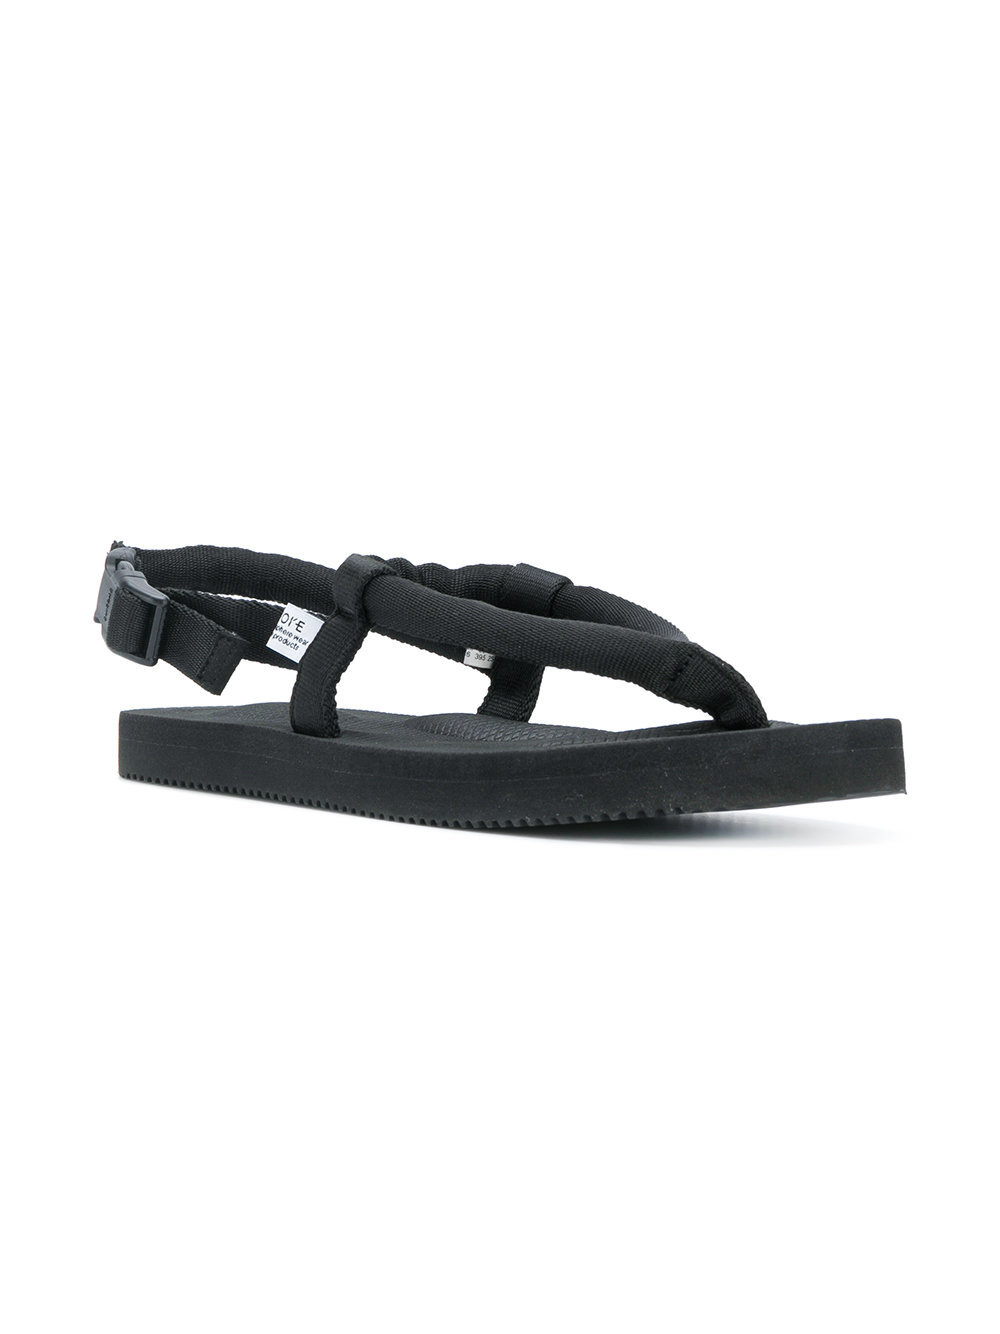 flip flops with straps on the back